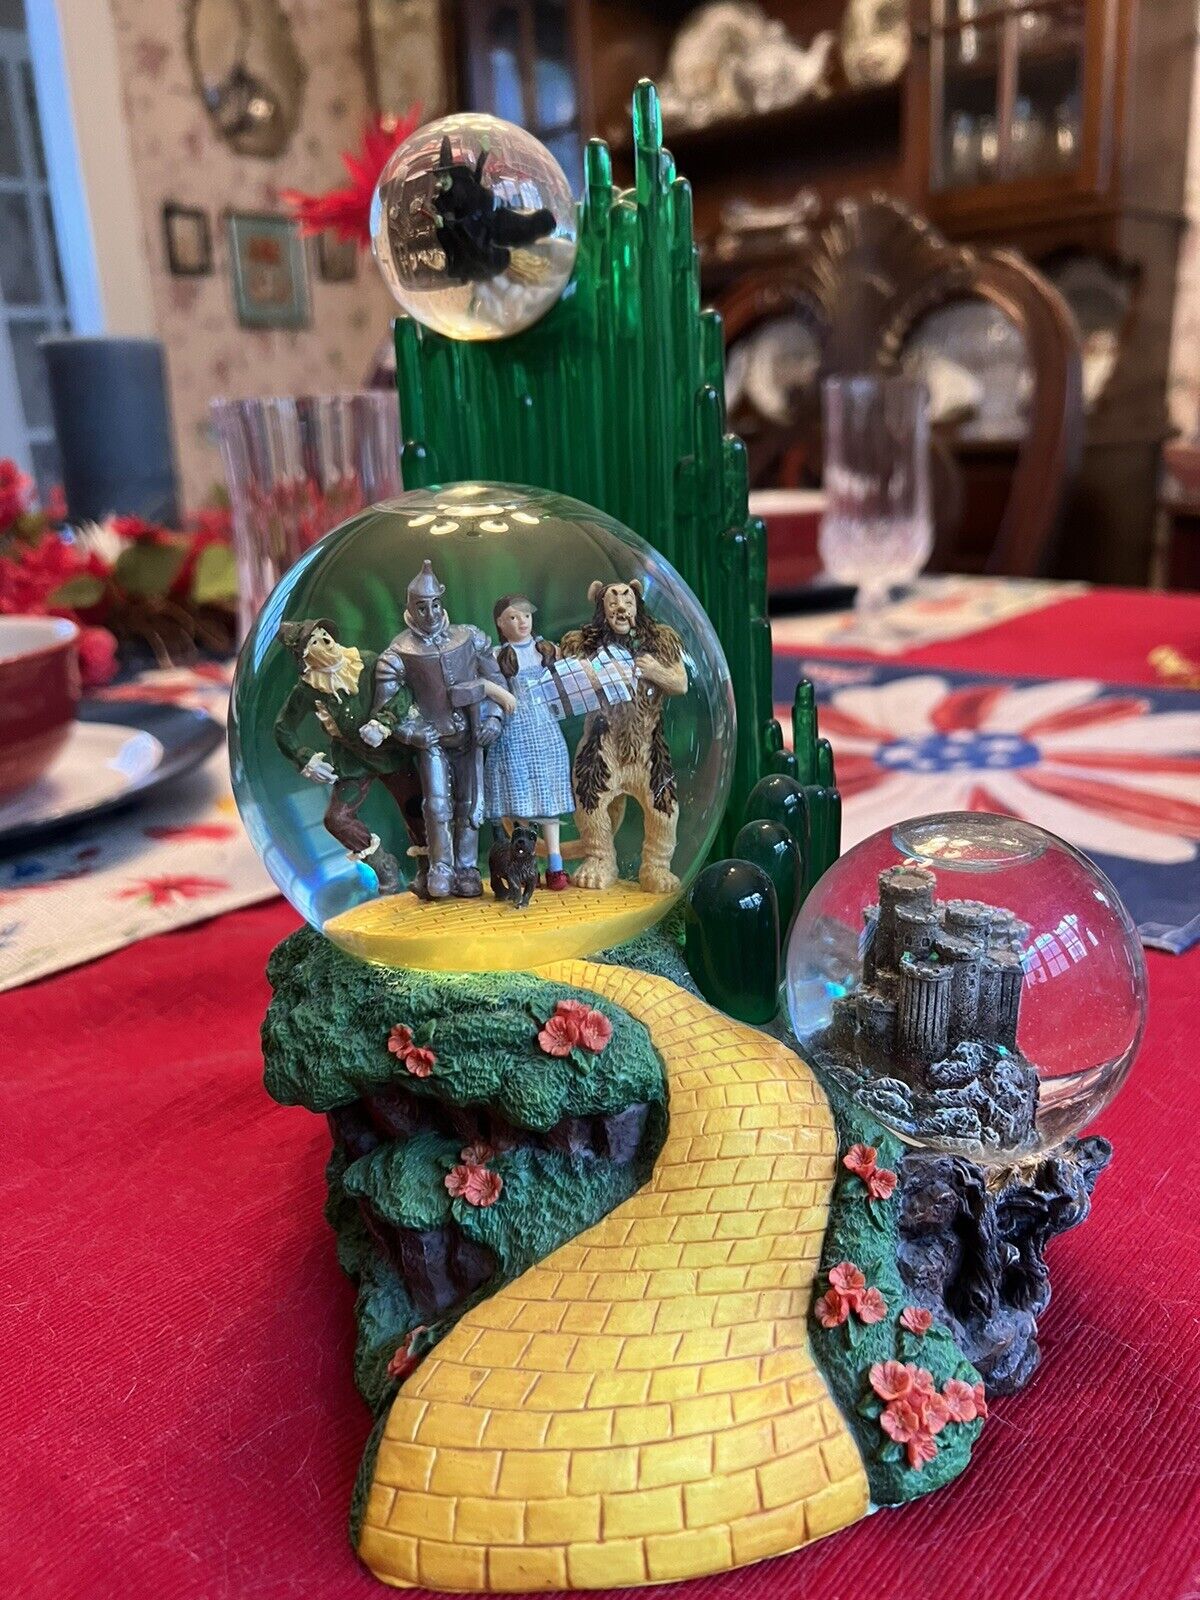 The Wizard of Oz Snow Globe Music Box We’re Off to See the Wizard#1820